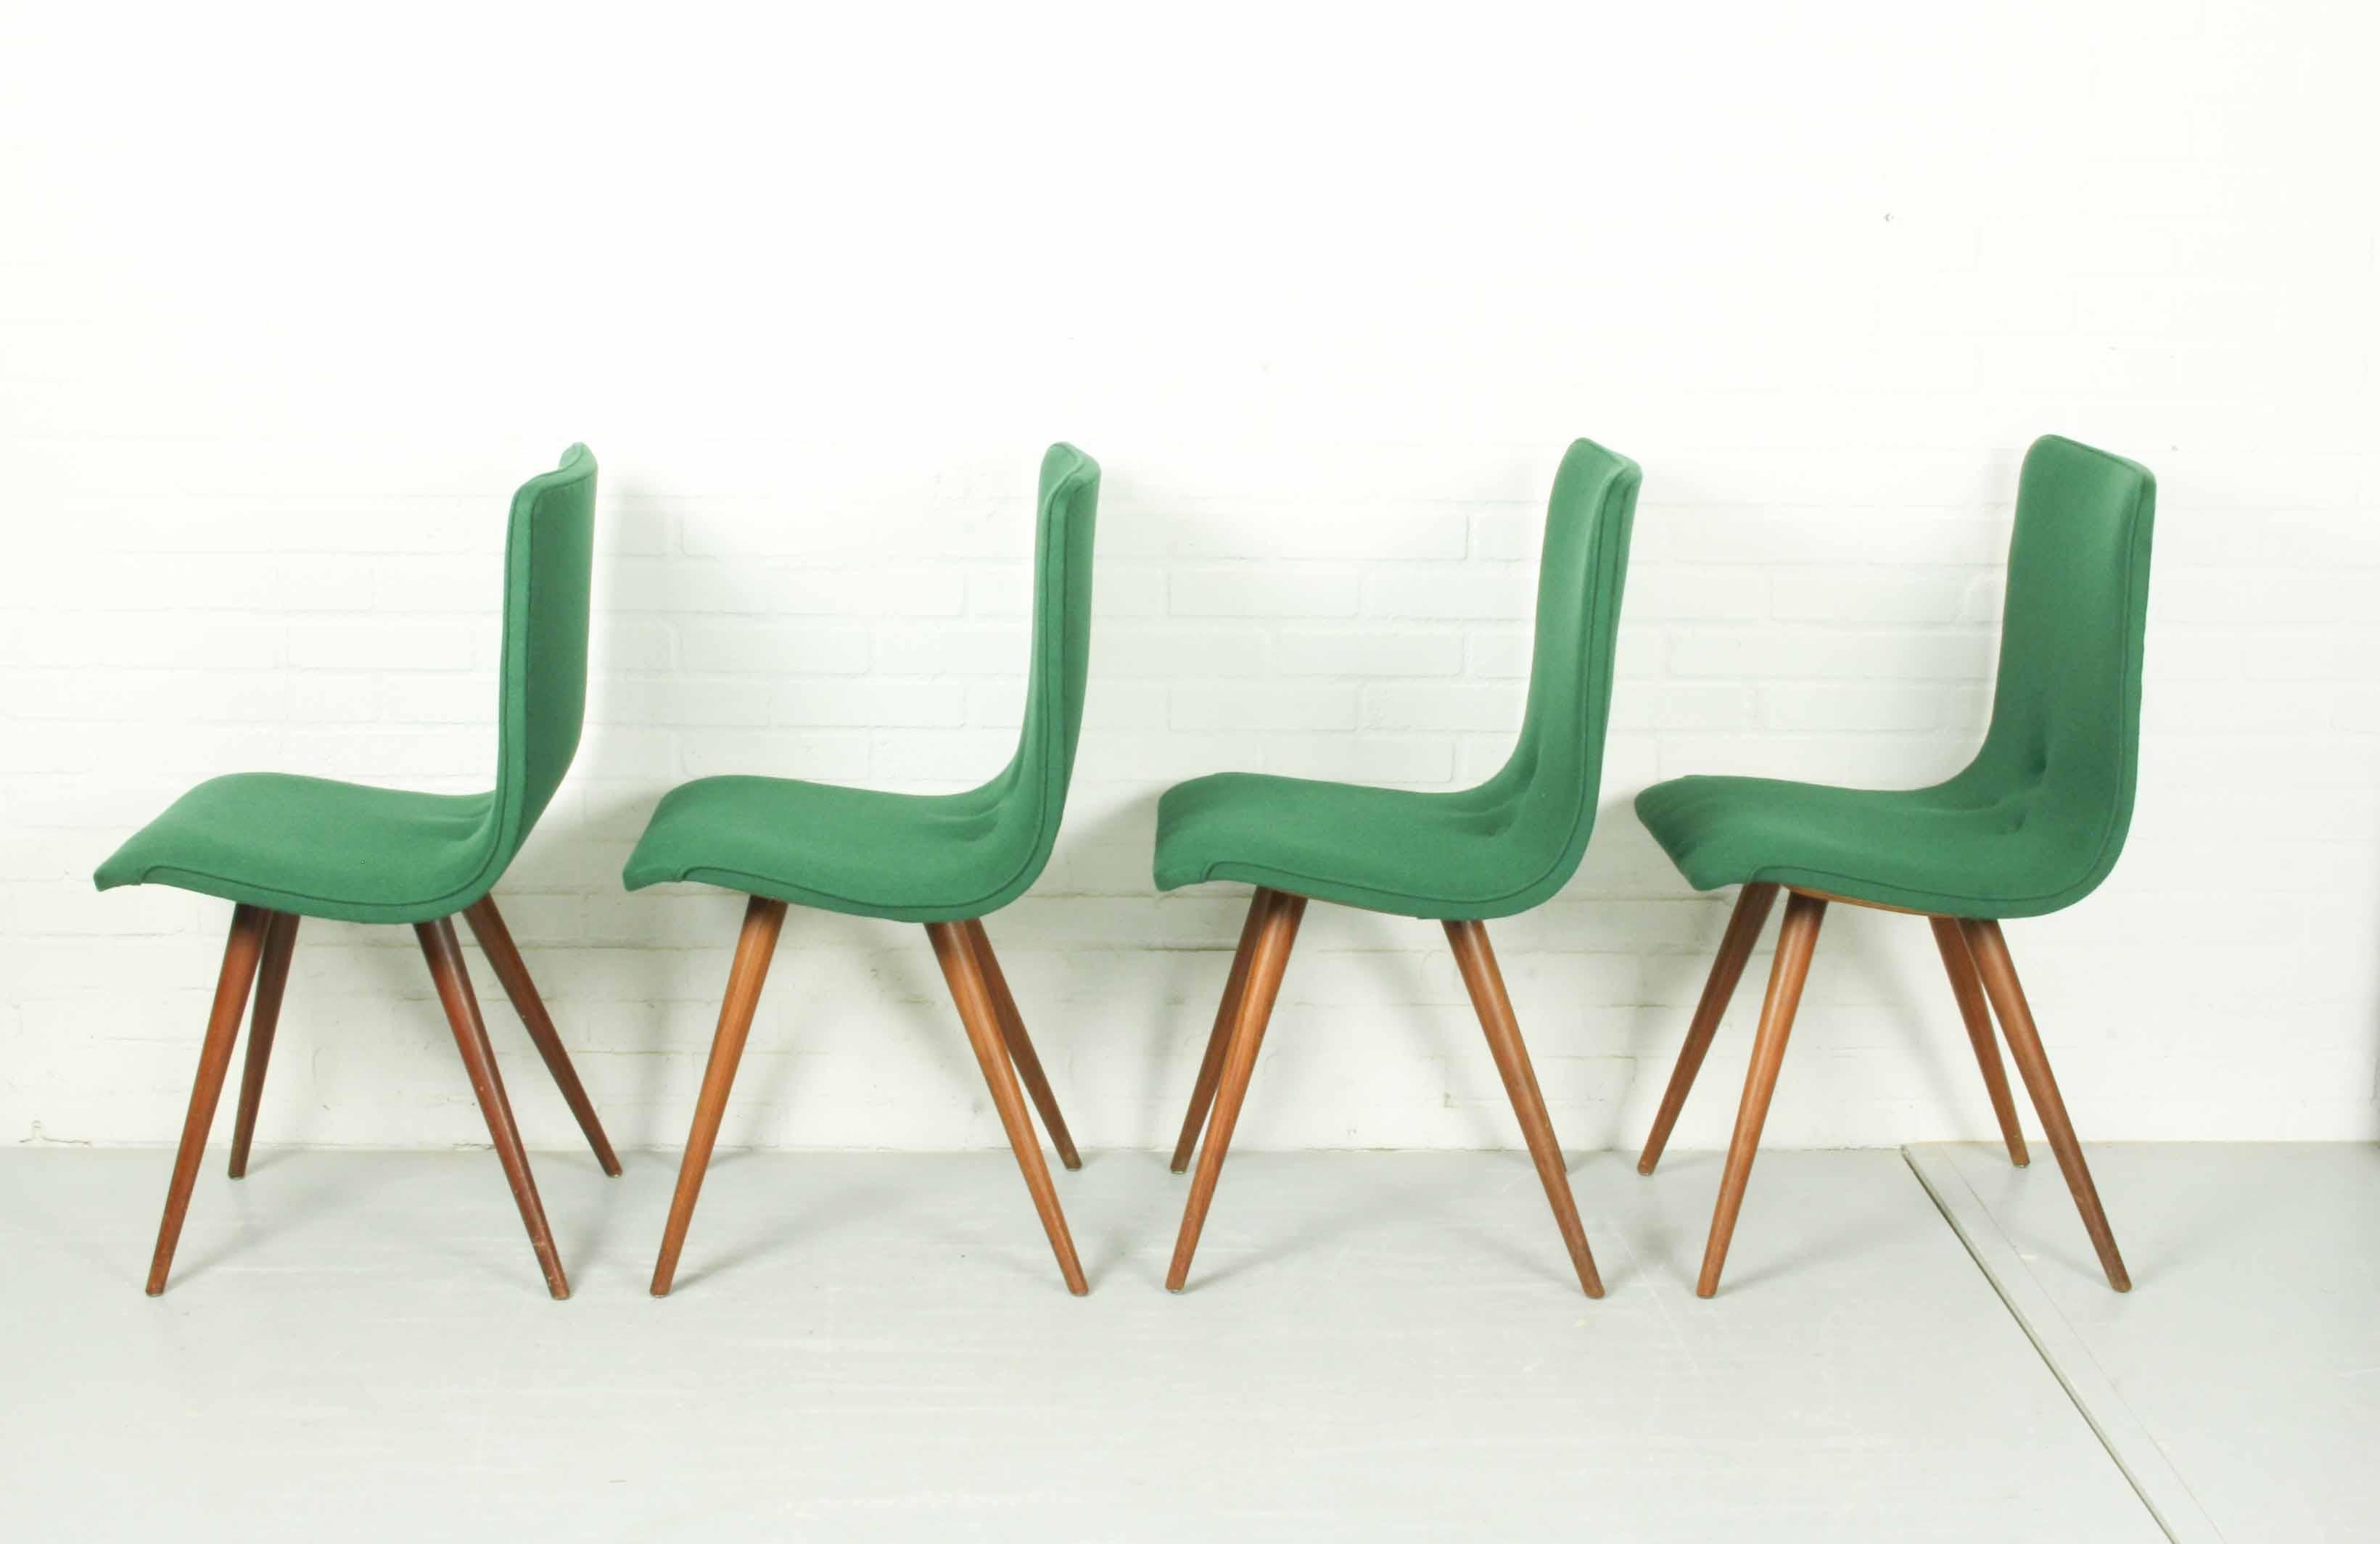 Mid-Century Modern Set of 4 Teak Dining Chairs by Van Os, 1950s For Sale